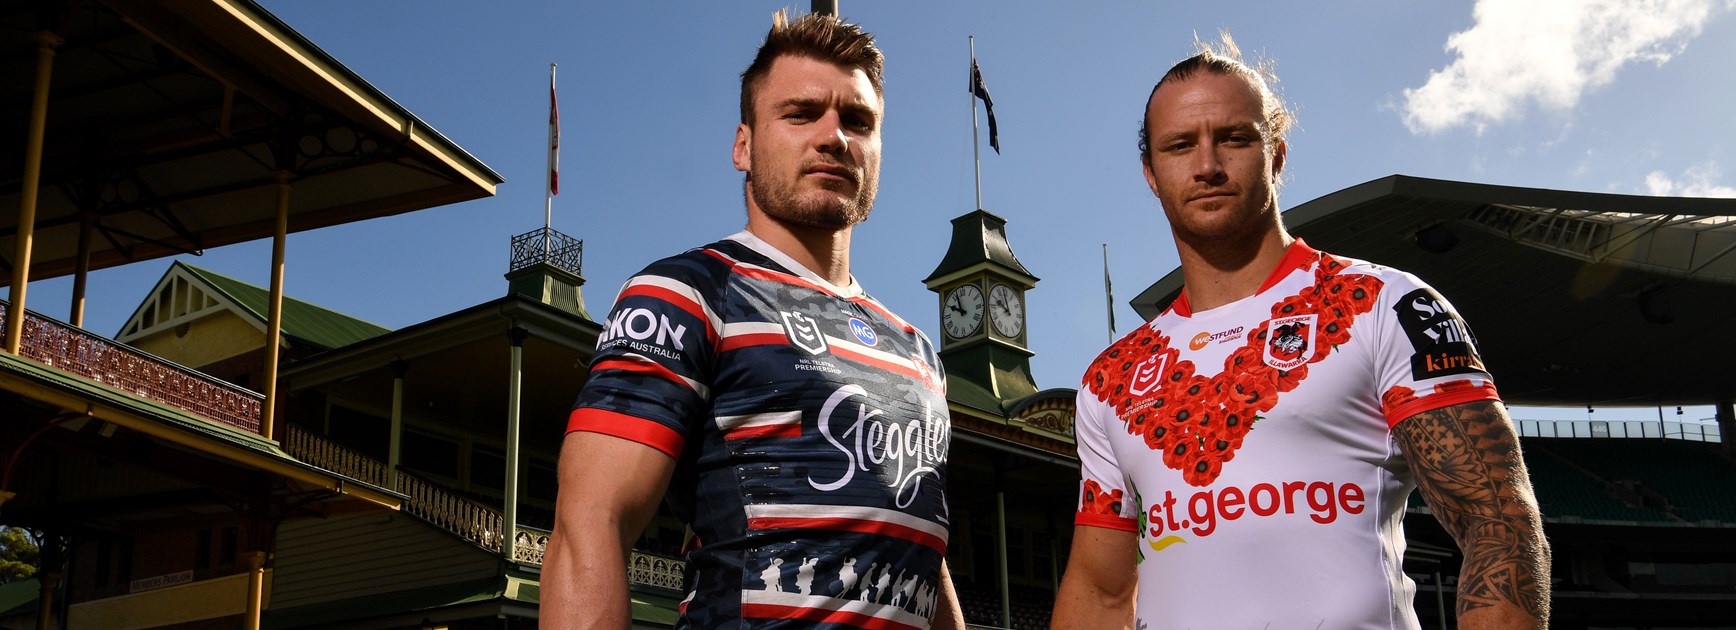 Somme trip gives added meaning to Anzac Day game for Roosters